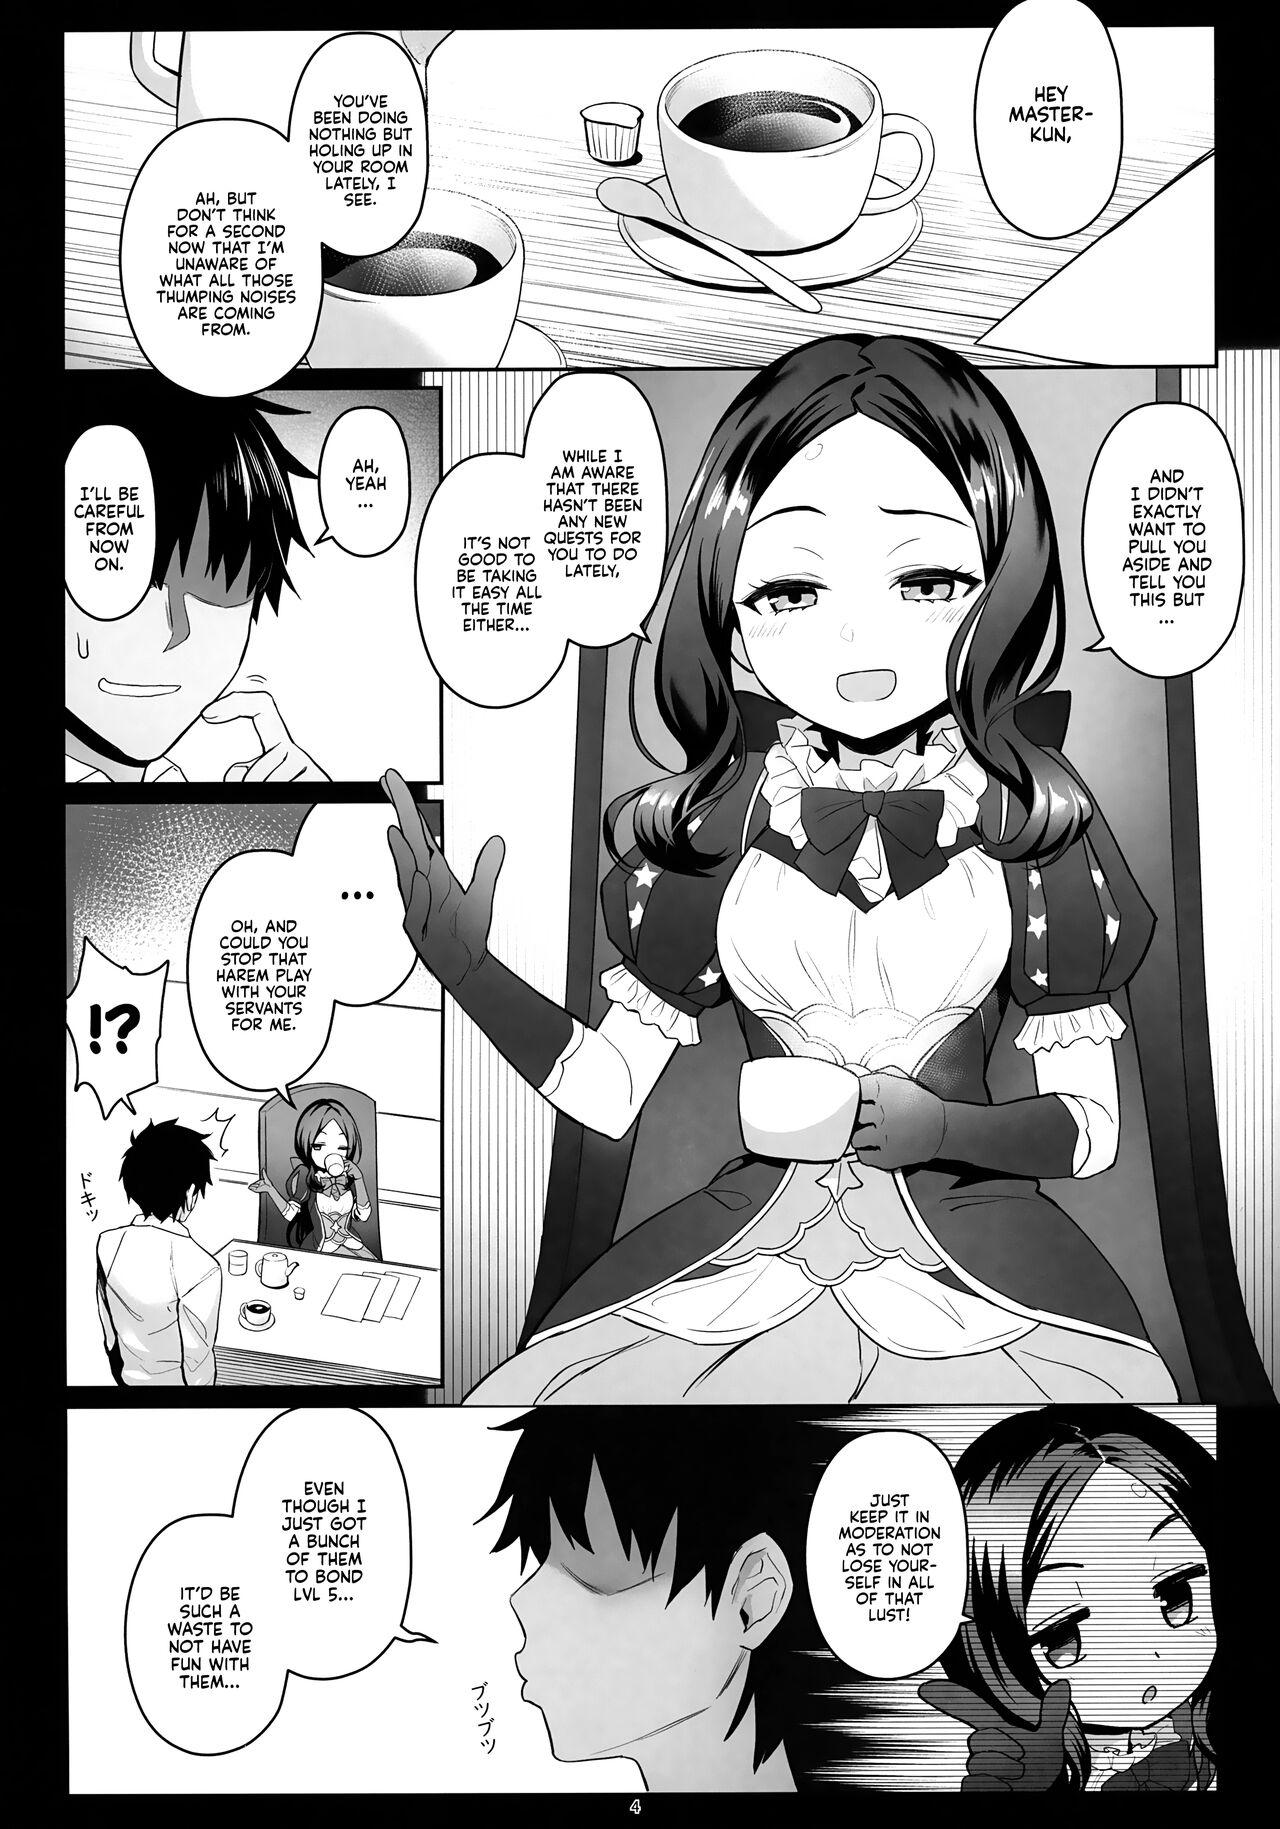 Girl Gets Fucked Love is in the Air at Chaldea Once Again! - Fate grand order Tease - Page 3